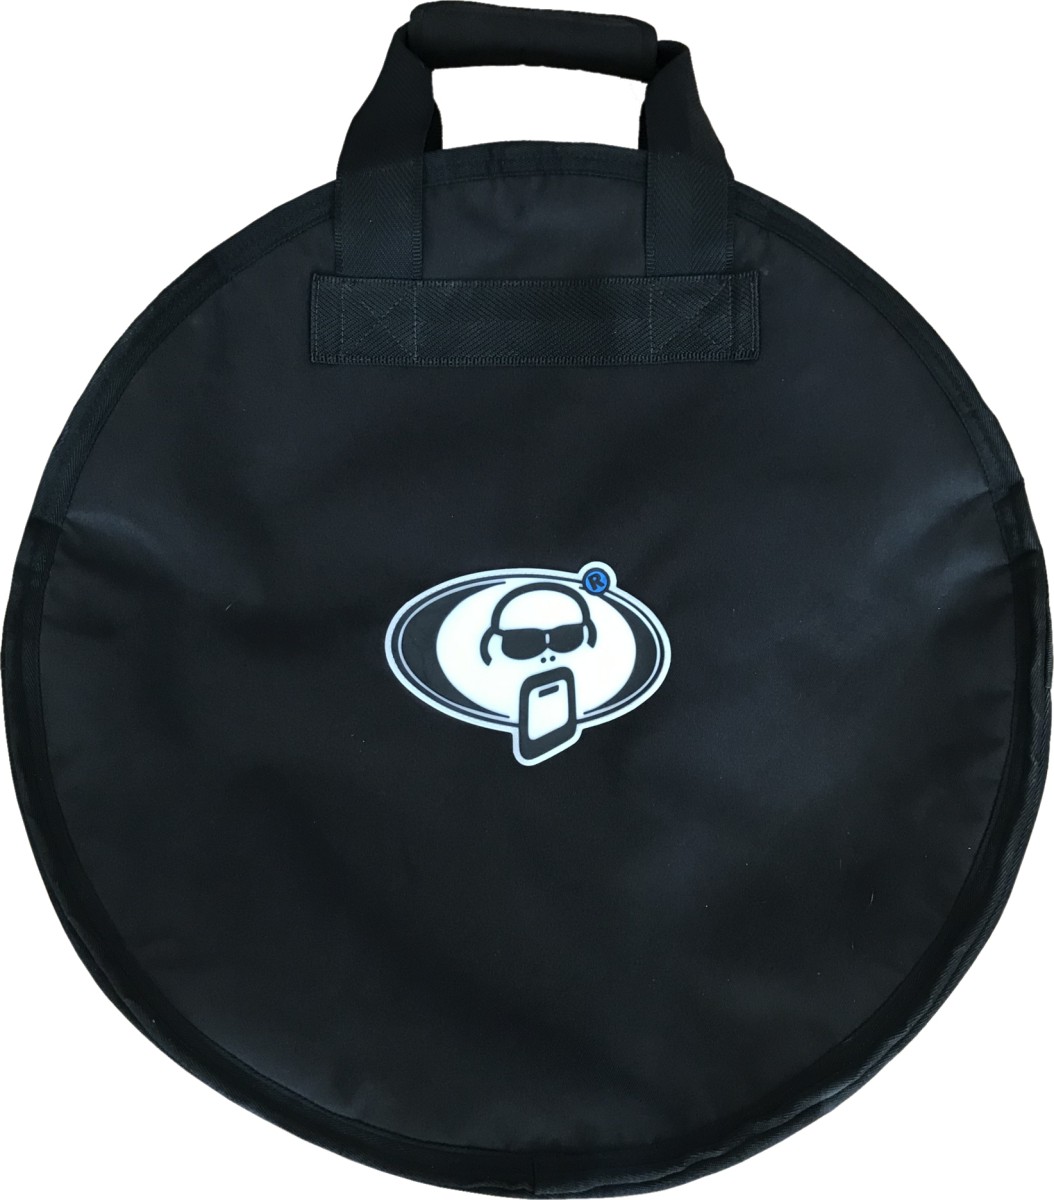 An image of Protection Racket 42" Gong Case | PMT Online